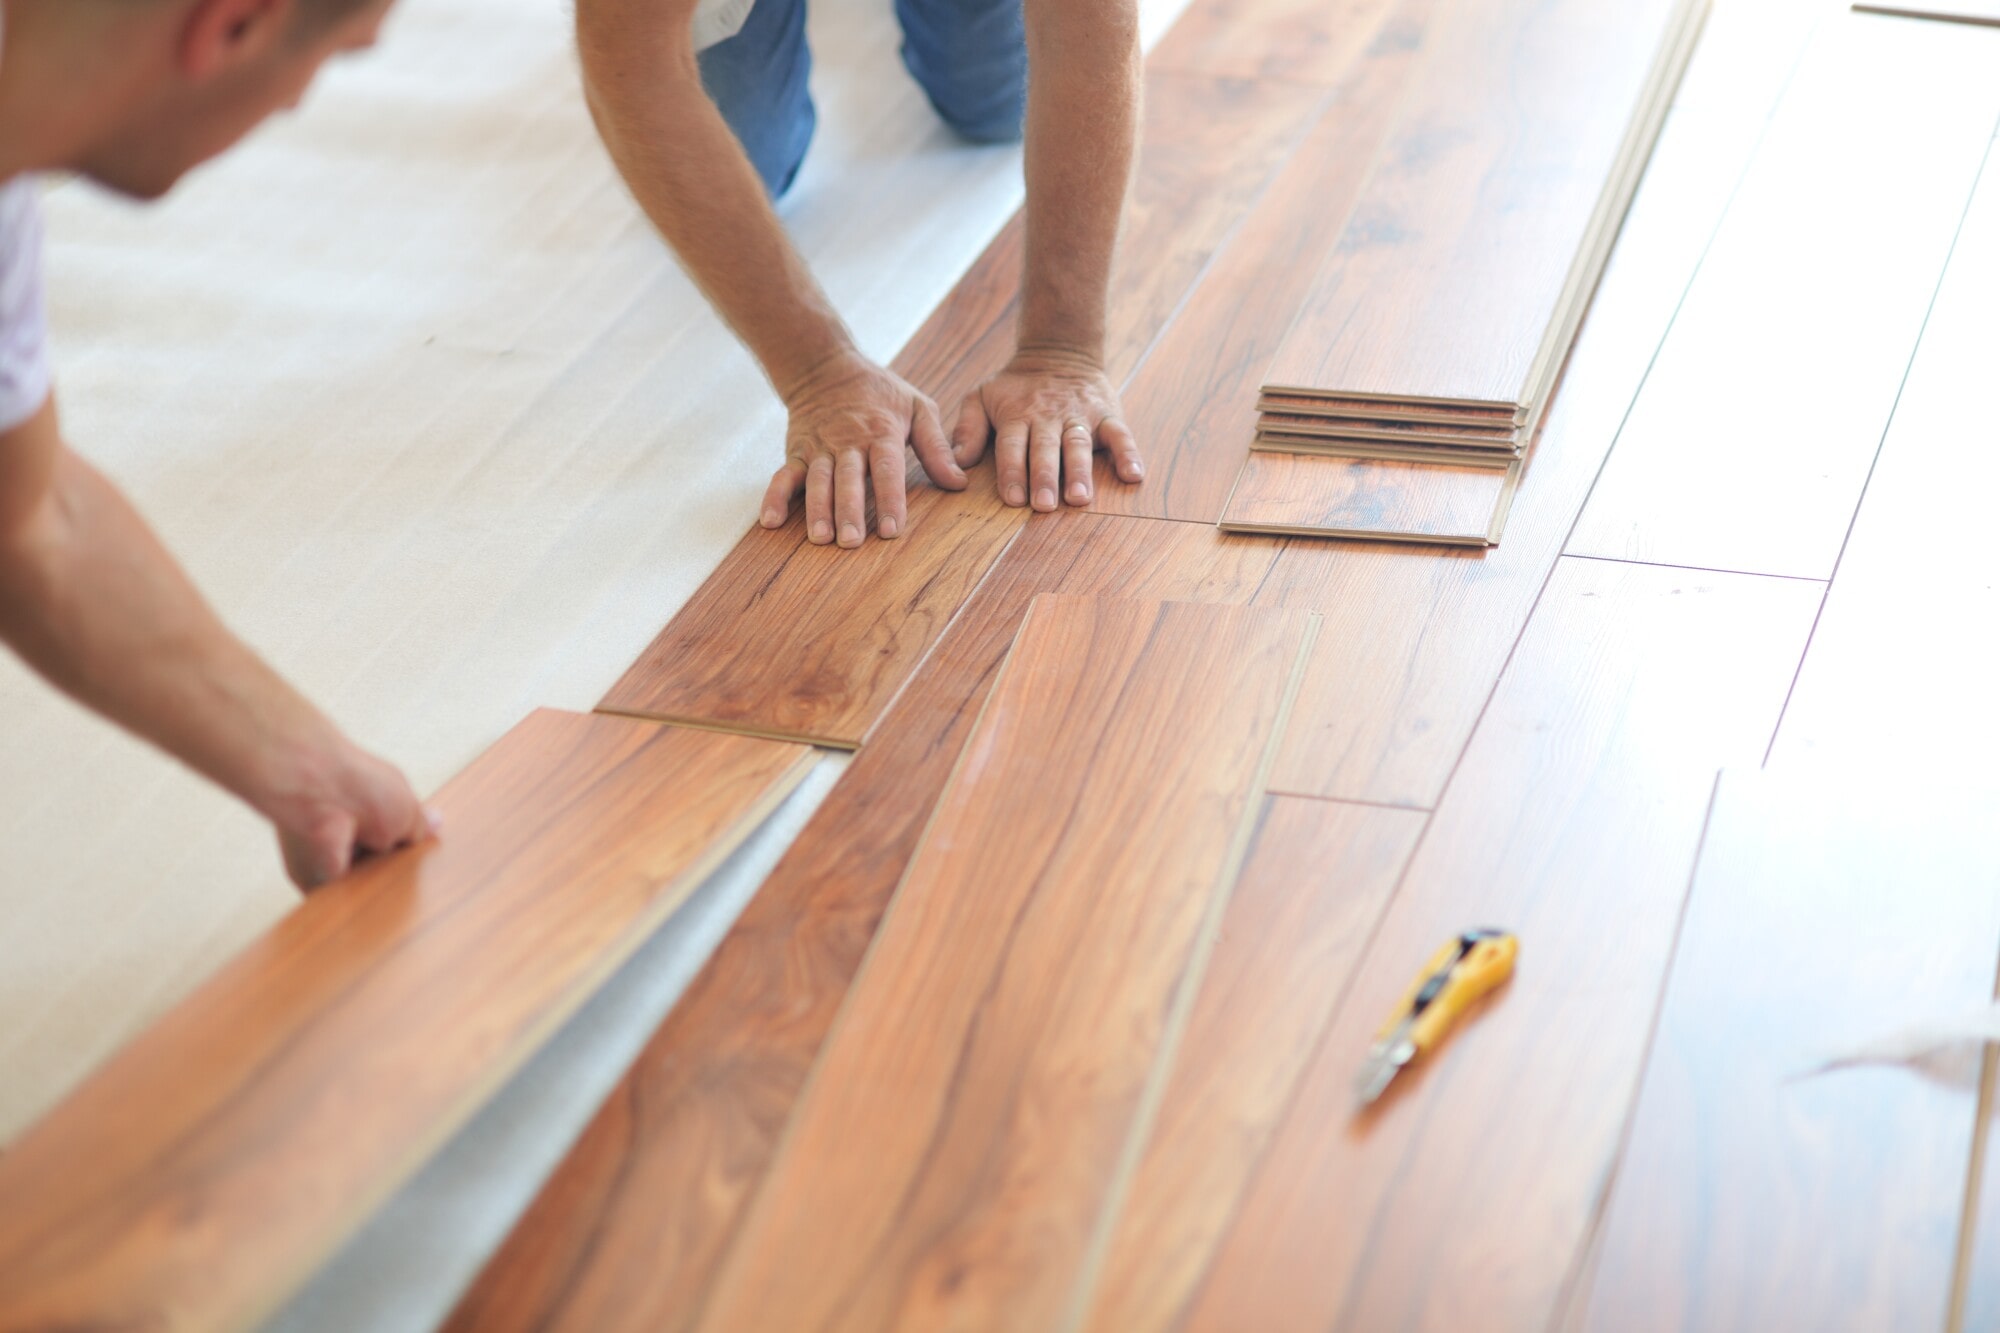 5 Home Upgrades To Improve the Value of Your Rental Property